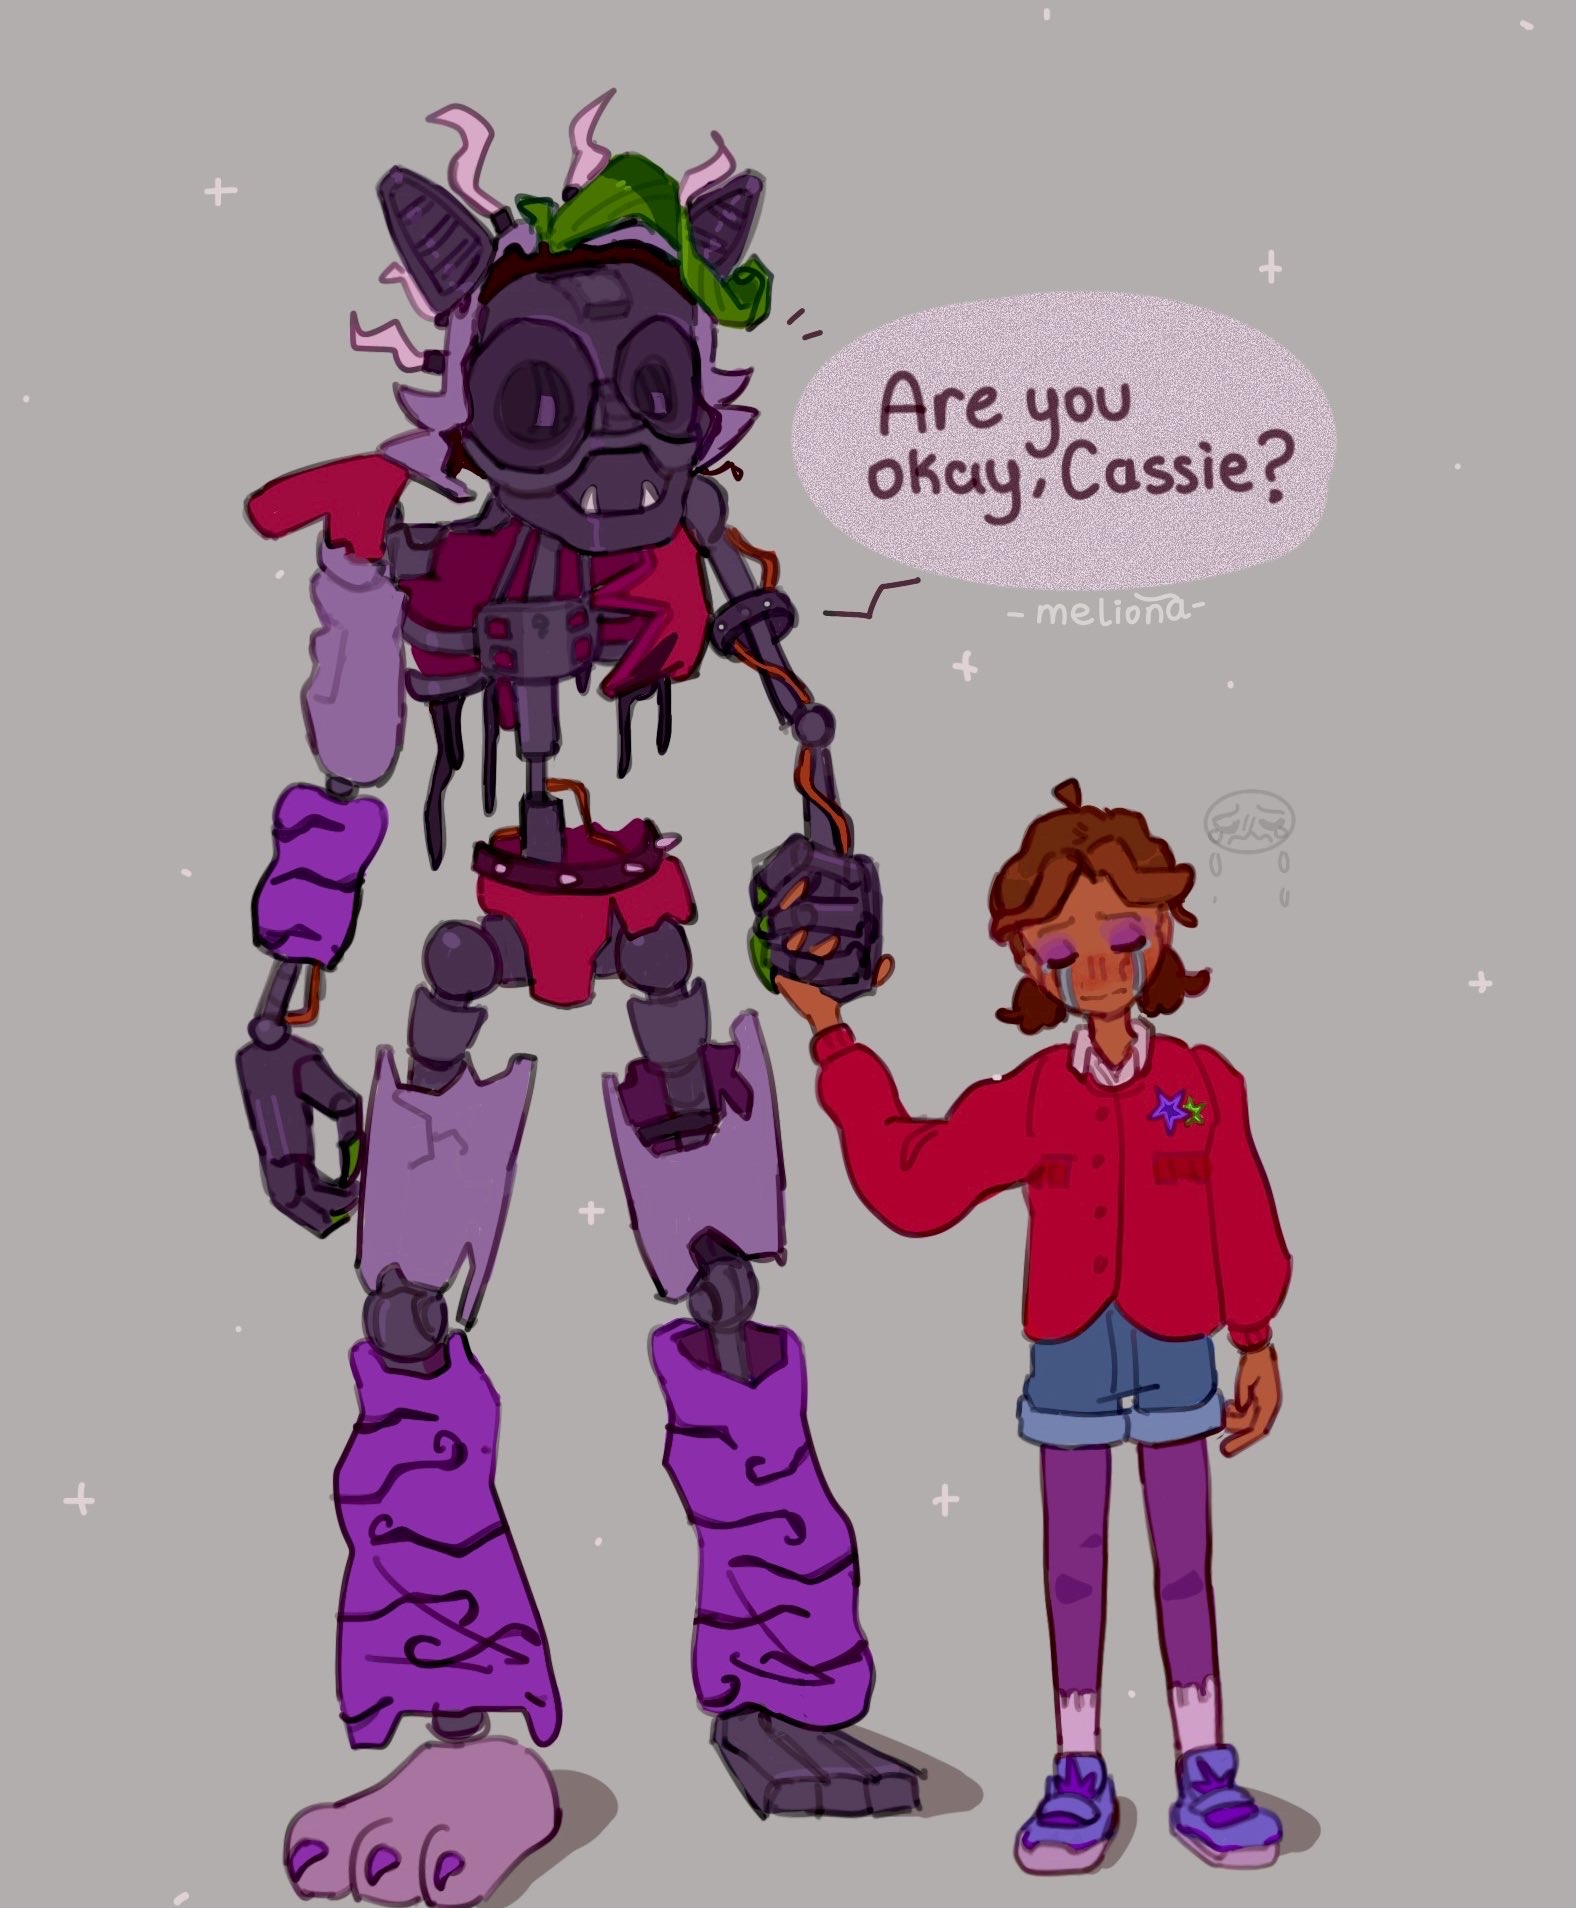 FNAF What If Roxy Wolf was Gregorys Guardian? by CinTanGallery on